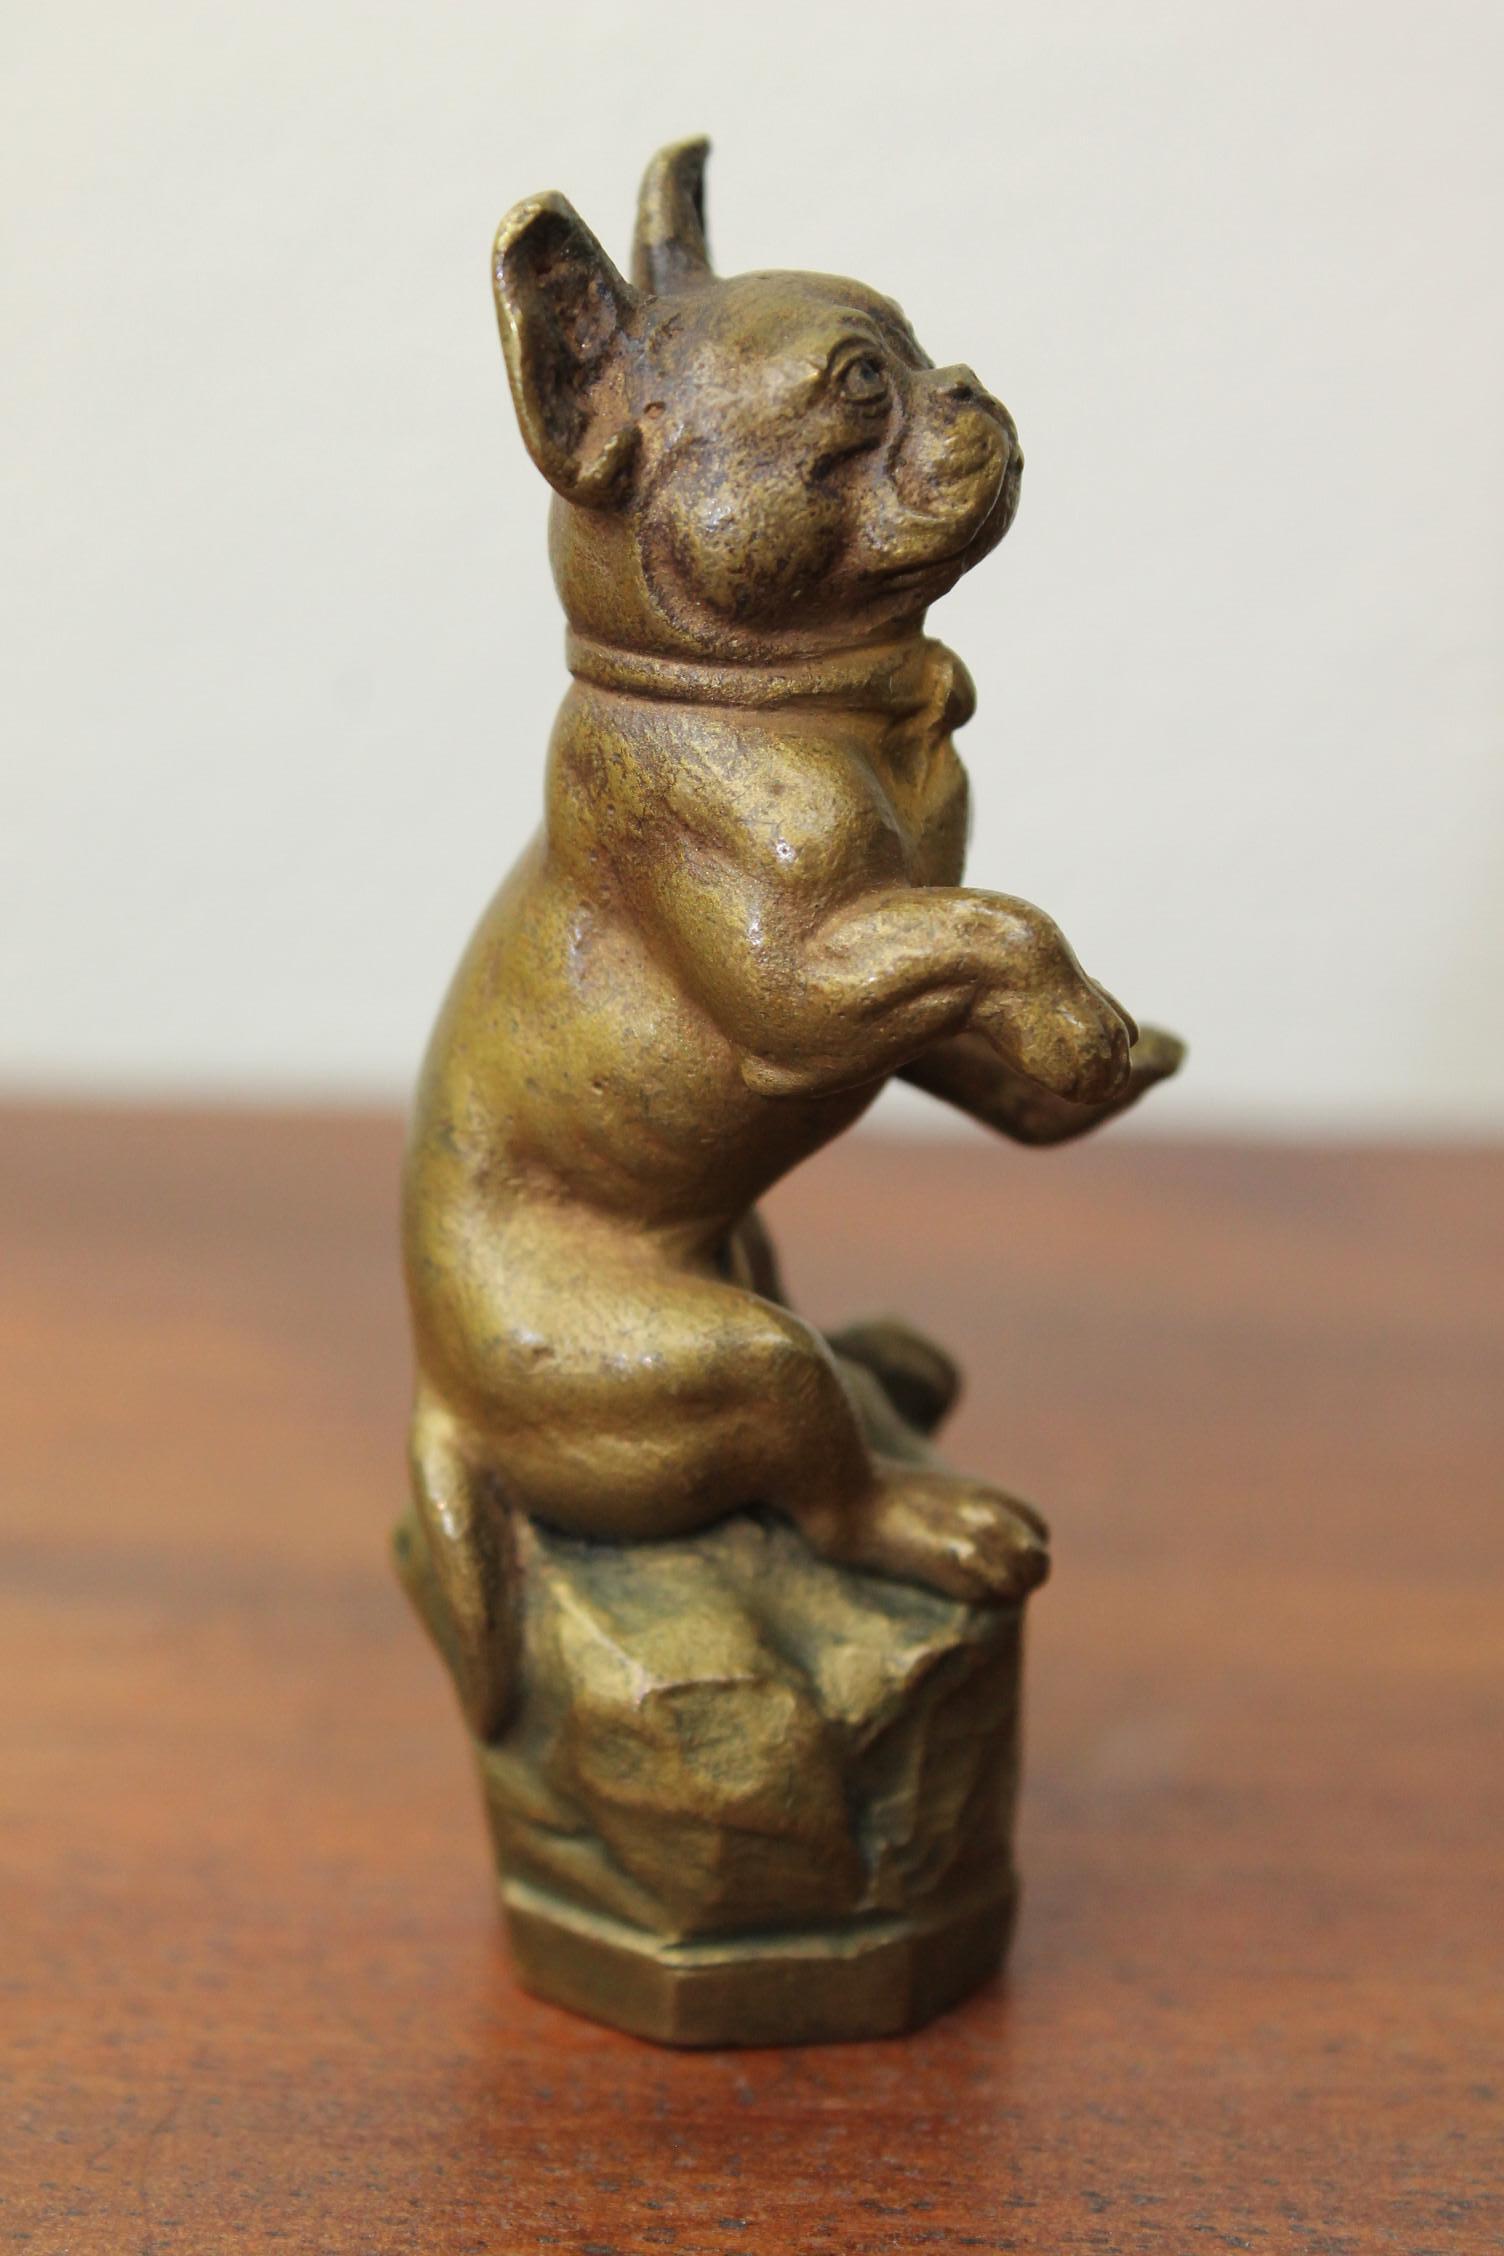 Art Nouveau Antique Wax Seal Stamp with Bulldog on Top, Early 20th Century